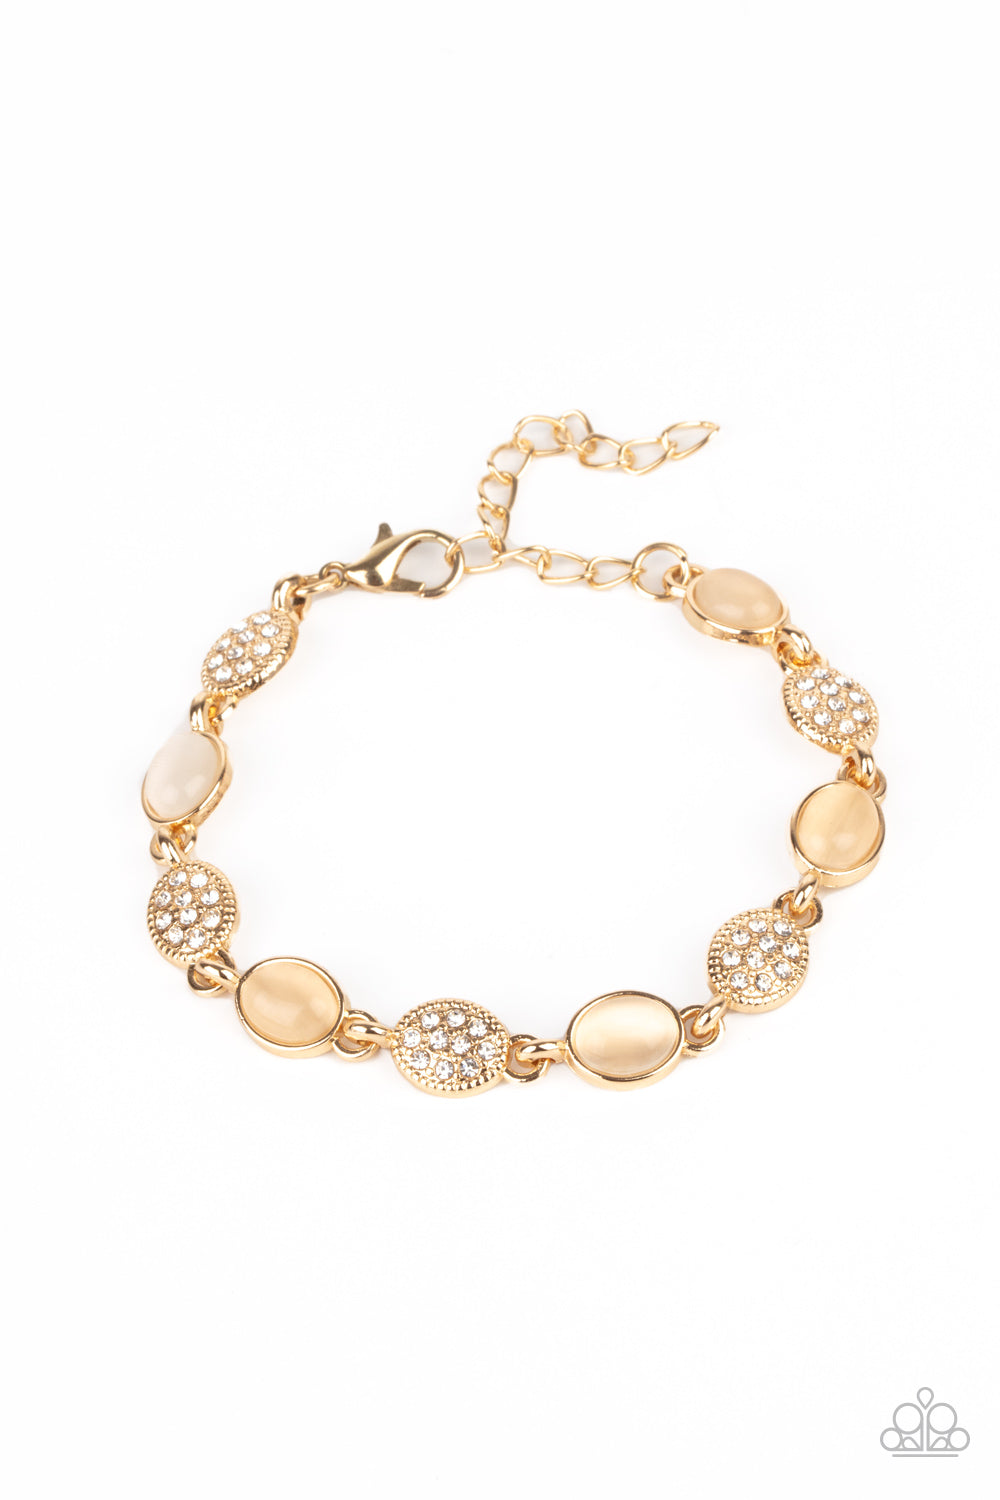 Stop and GLOW Gold Bracelet